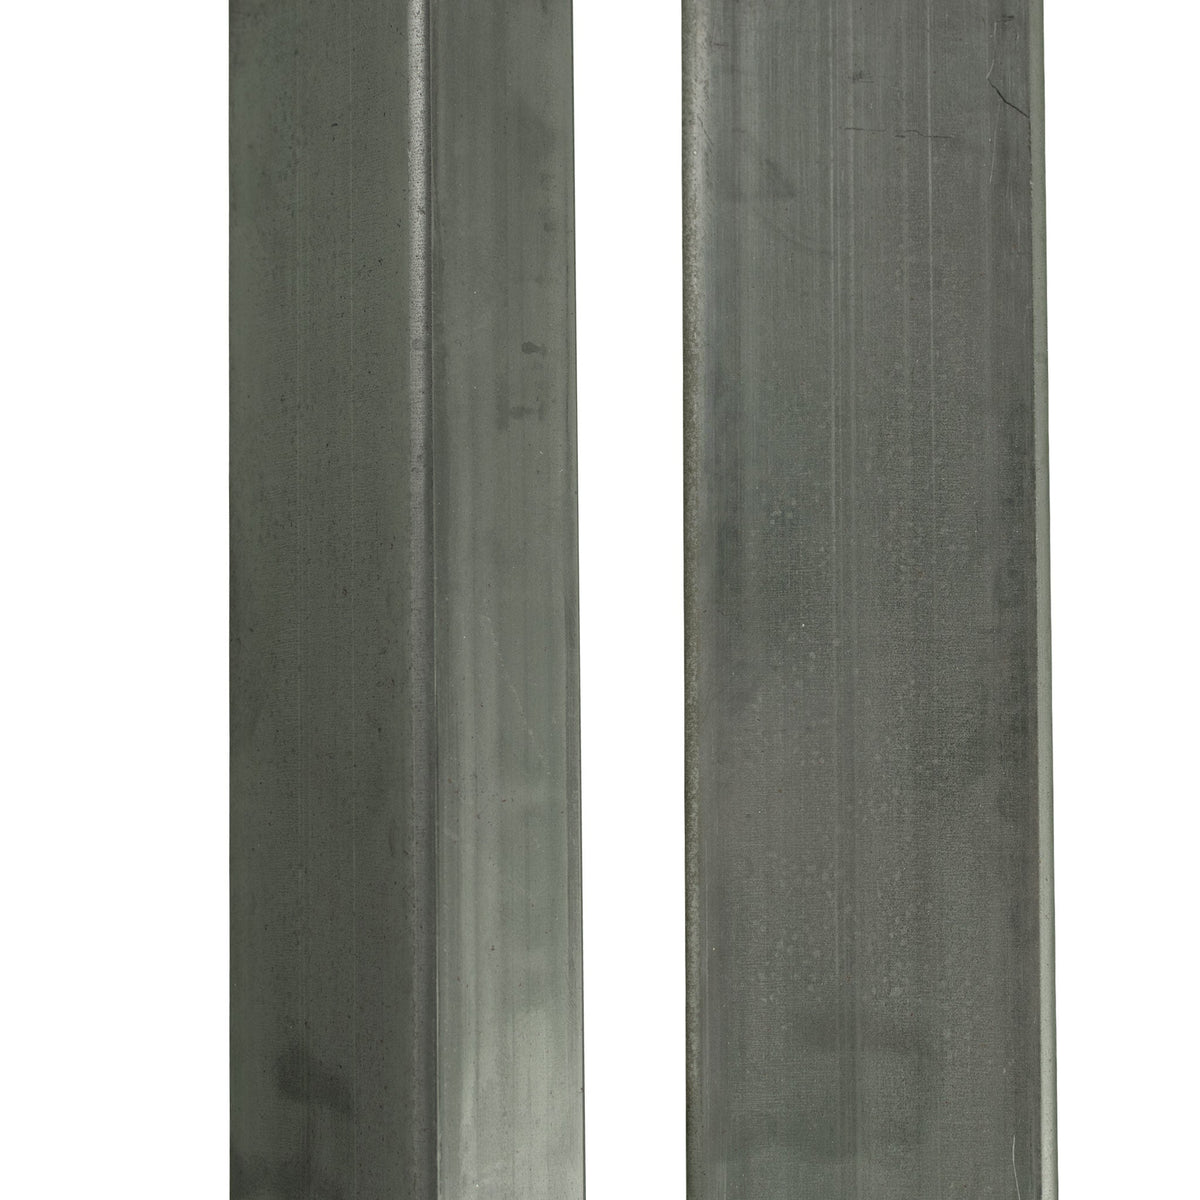 Rectangular Steel Tubing is hot rolled A513 american made metal.